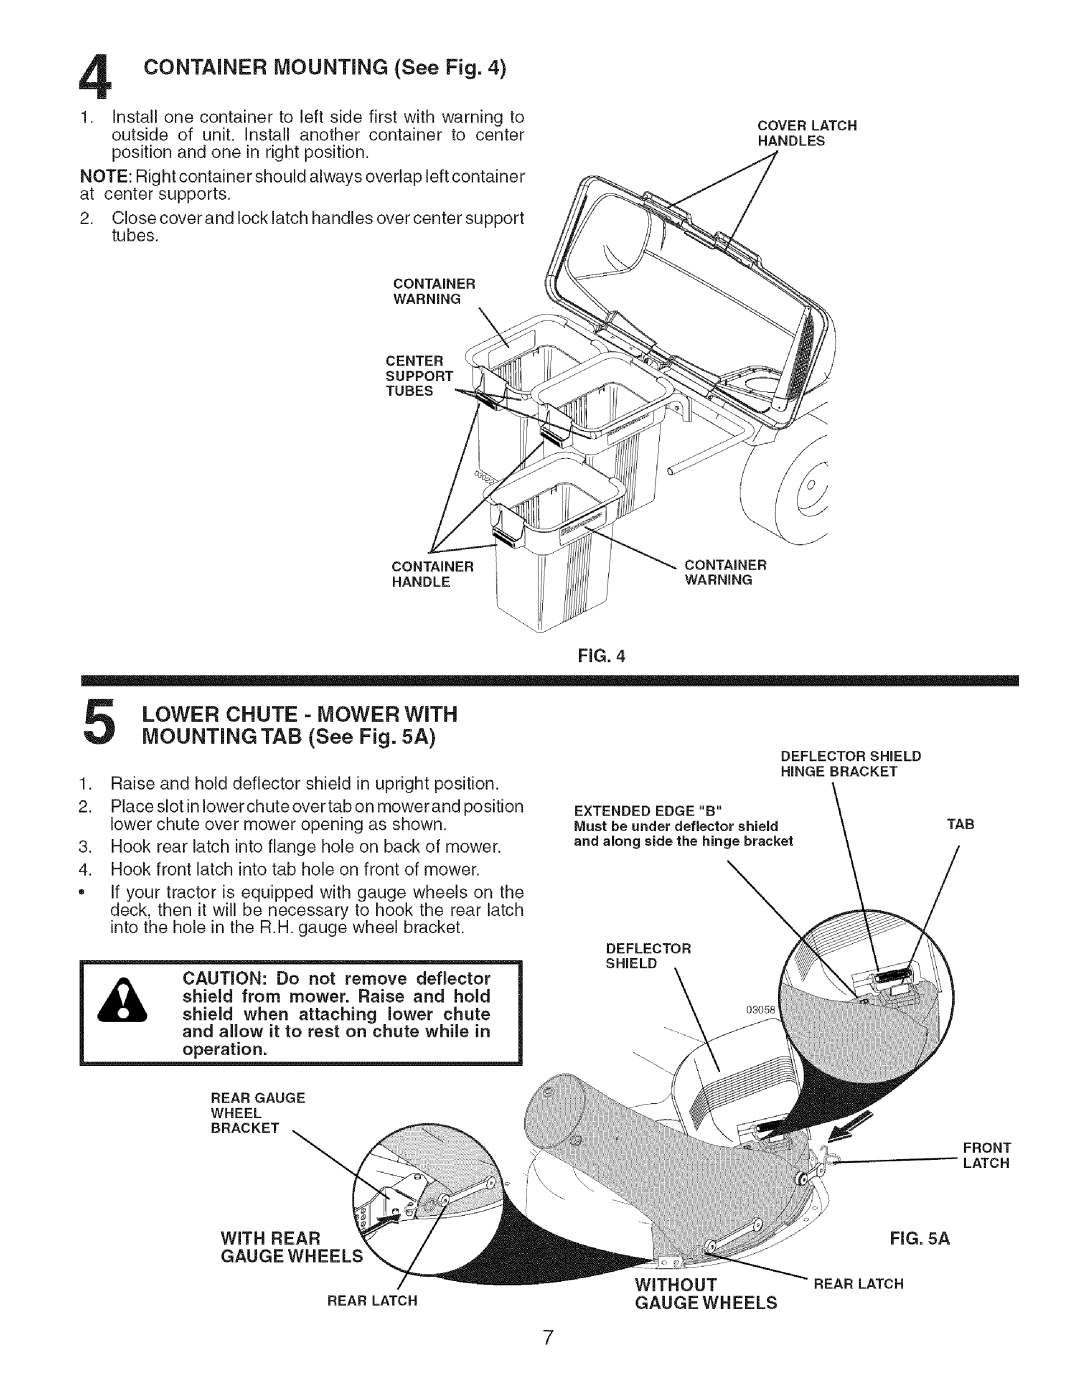 Craftsman 917.24898 owner manual Lower Chute = Mowerwith, MOUNTING TAB See A, CONTAINER MOUNTING See Fig, Gauge Wheels 